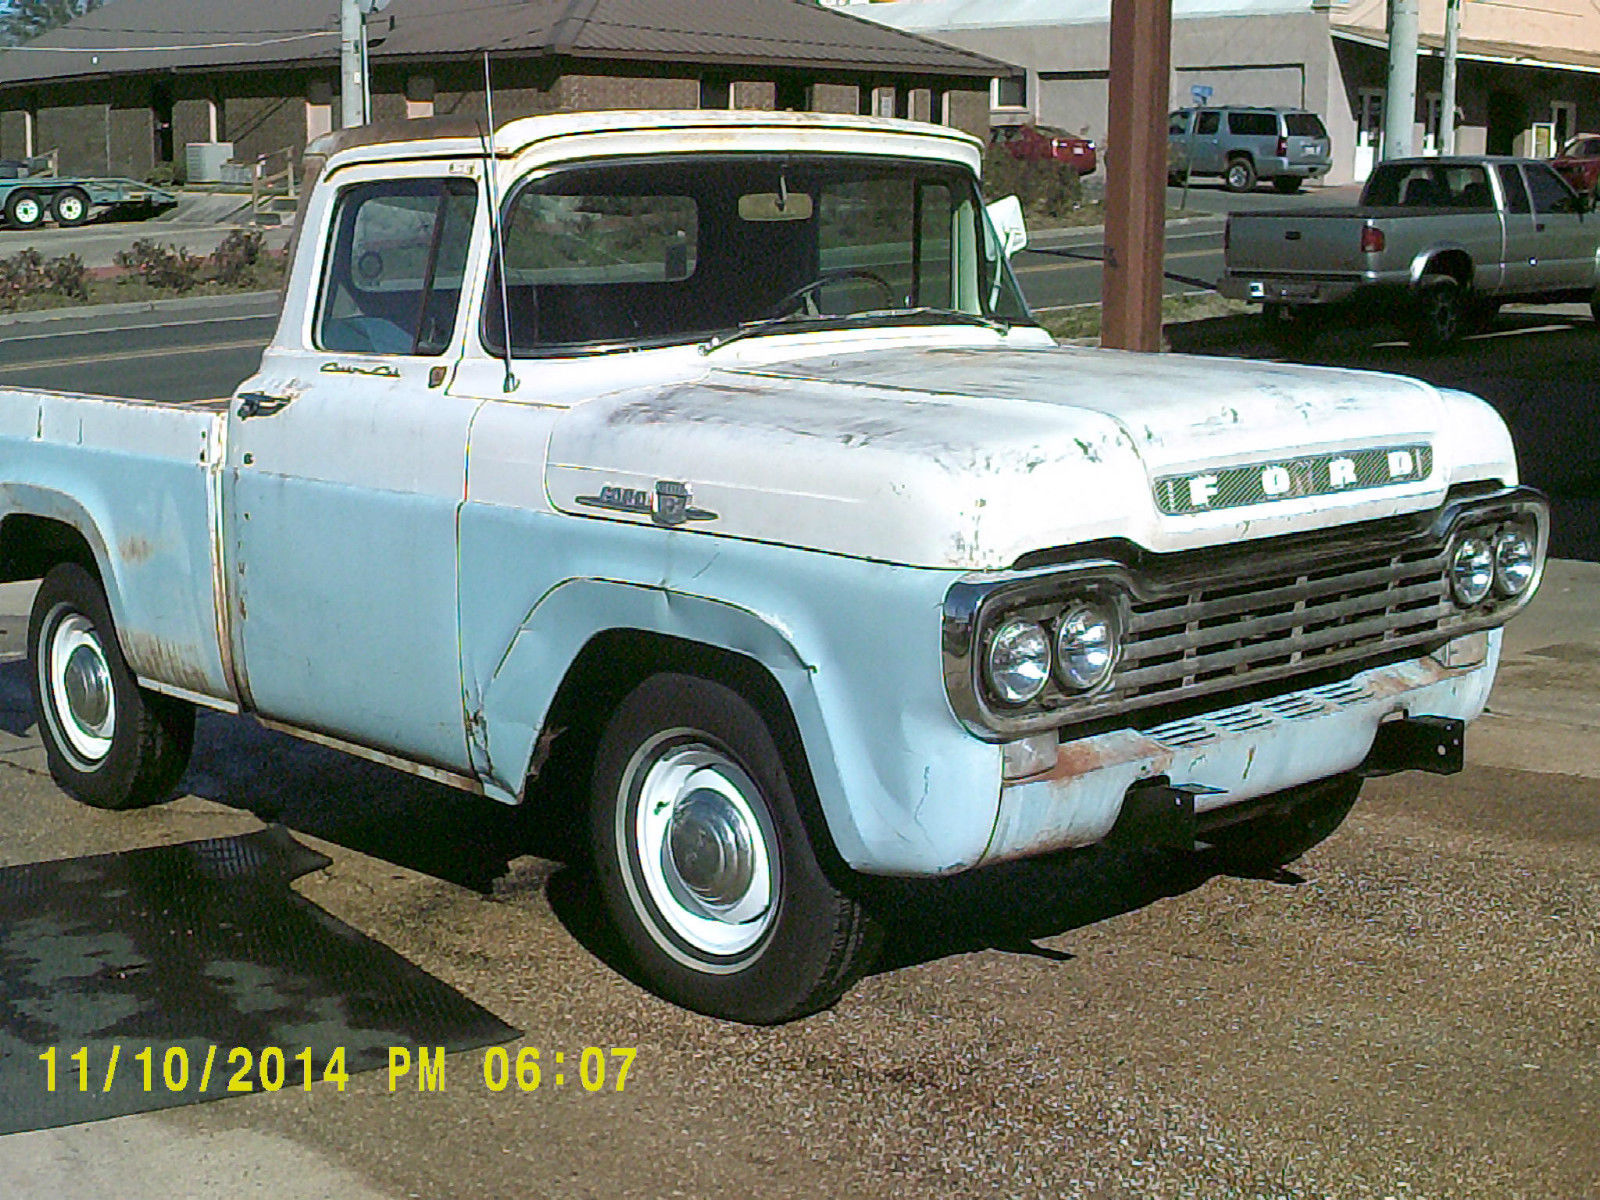 1959 F100 project. Excellant 223 6cyl, 4 speed man trans